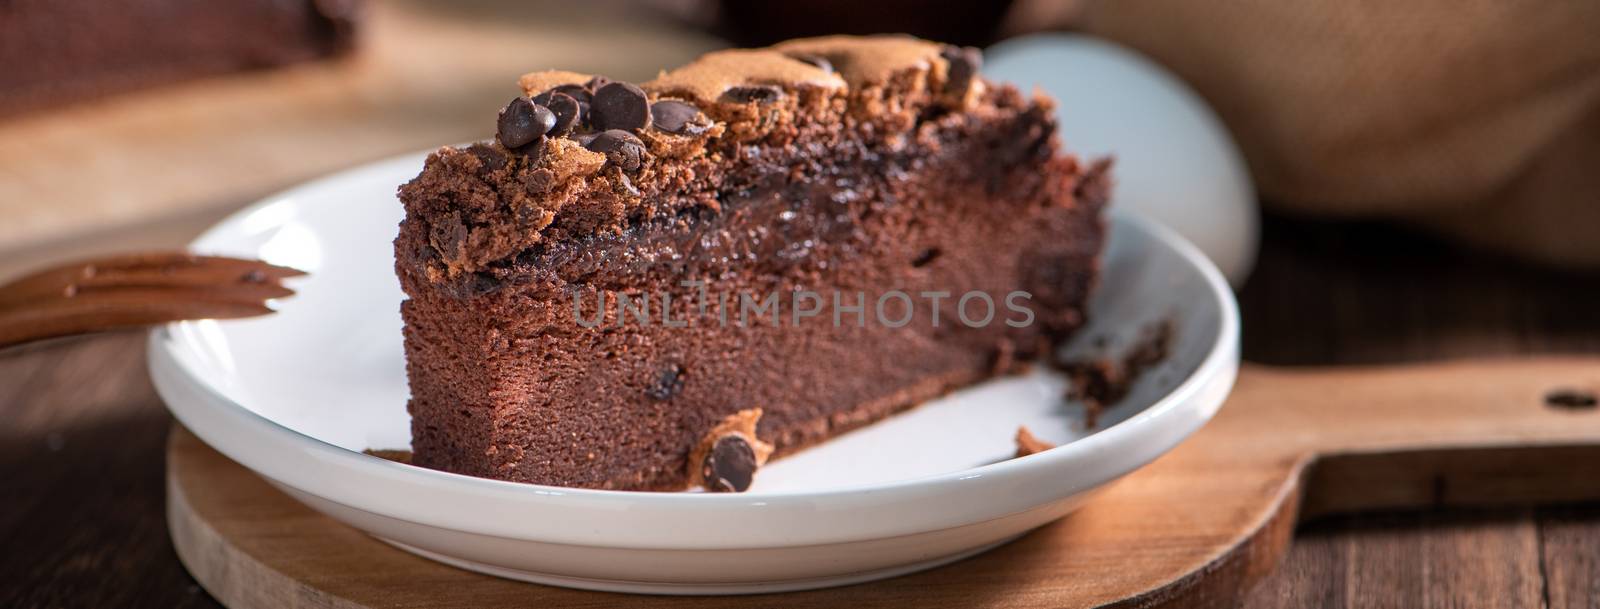 Chocolate flavor Taiwanese traditional sponge cake (Taiwanese castella kasutera) on a wooden tray background table with ingredients, close up.